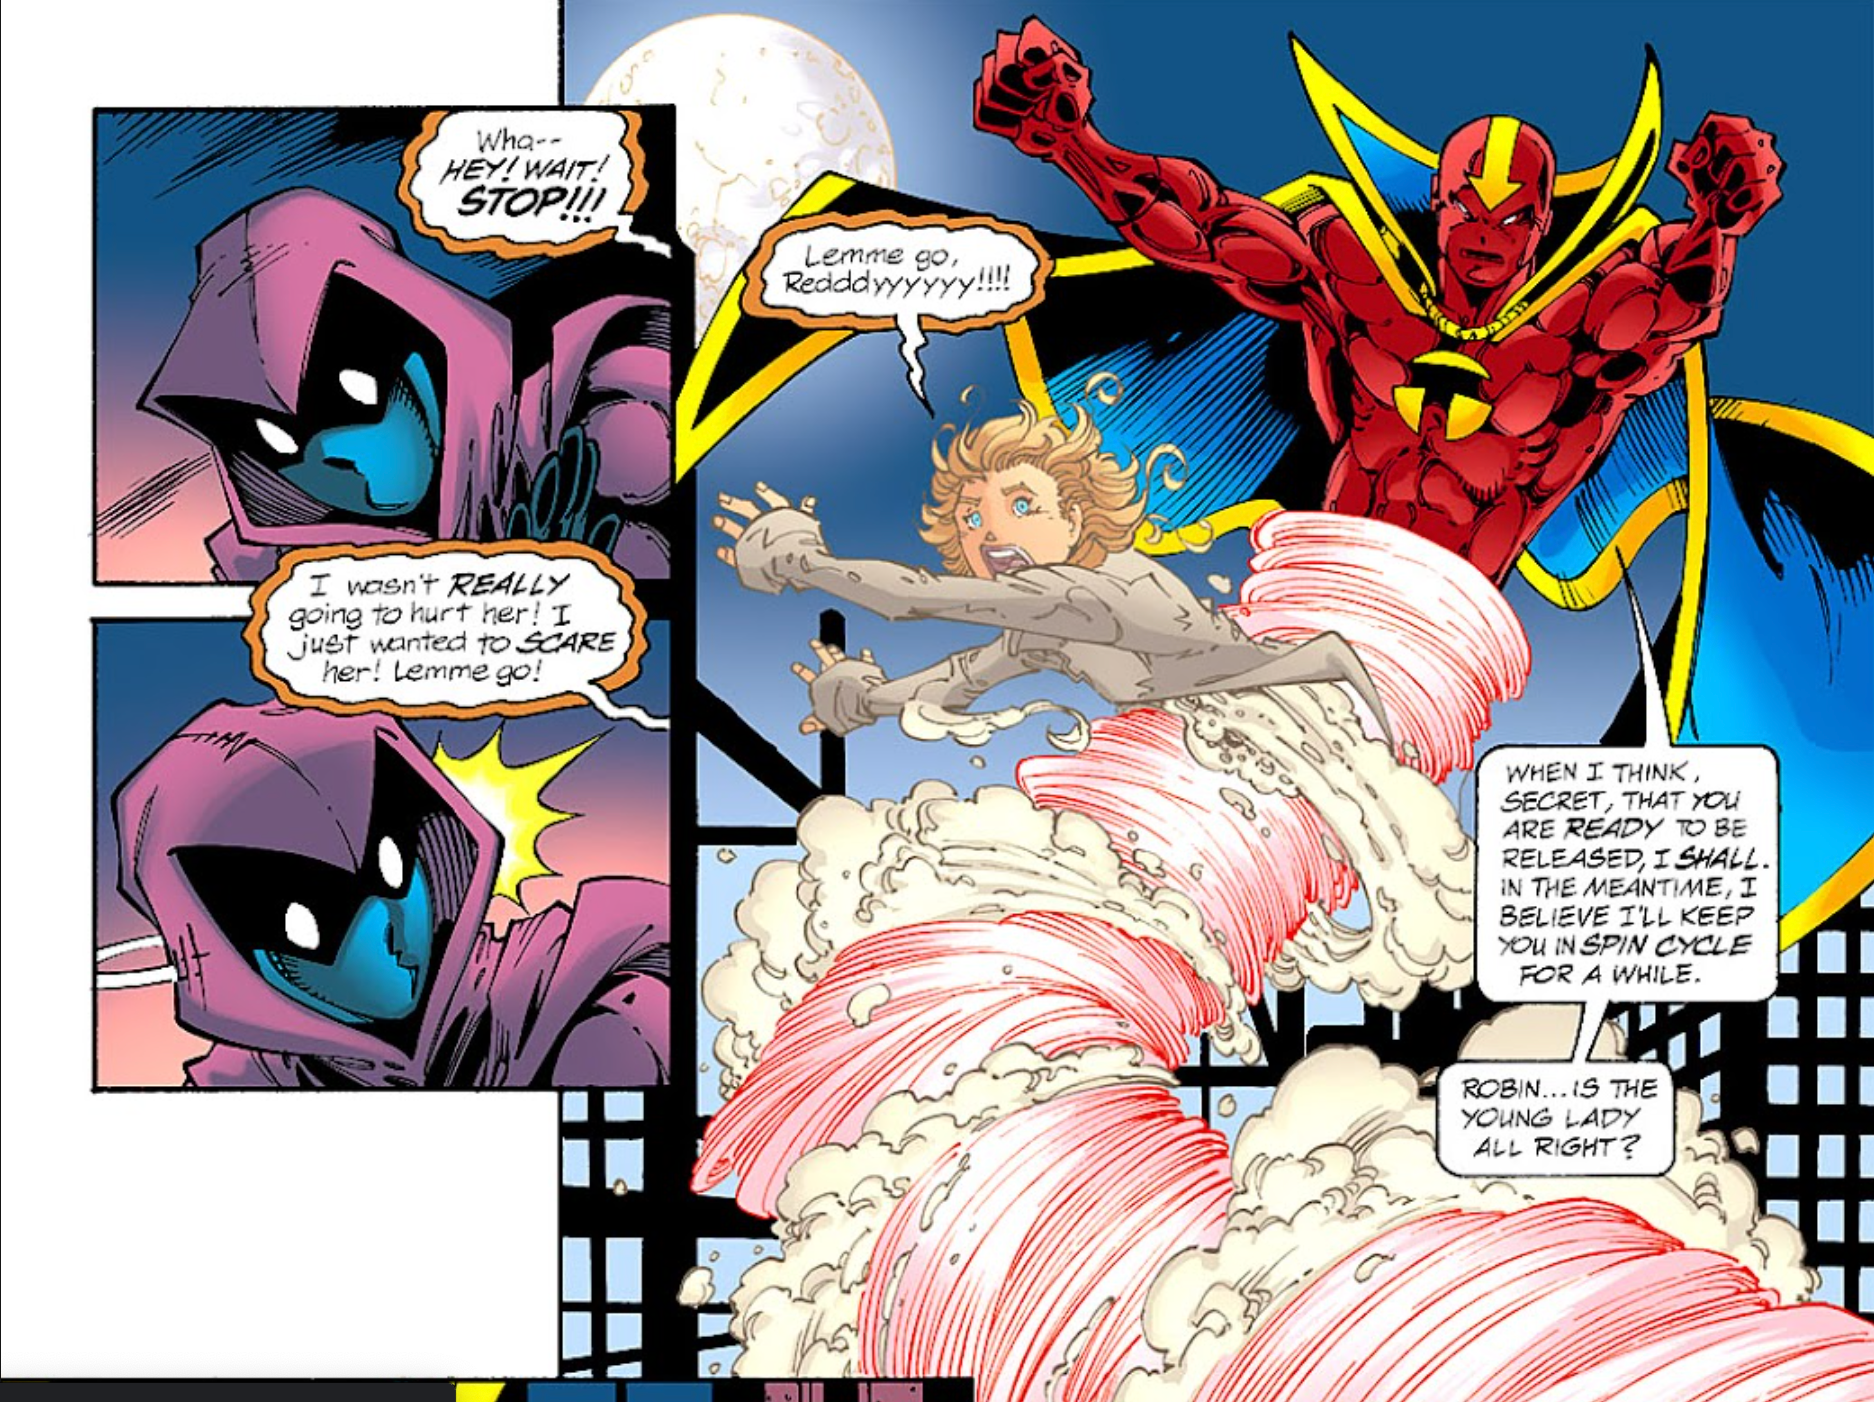 The Fight Between Secret and Spoiler is Ended by Red Tornado in Young Justice #30